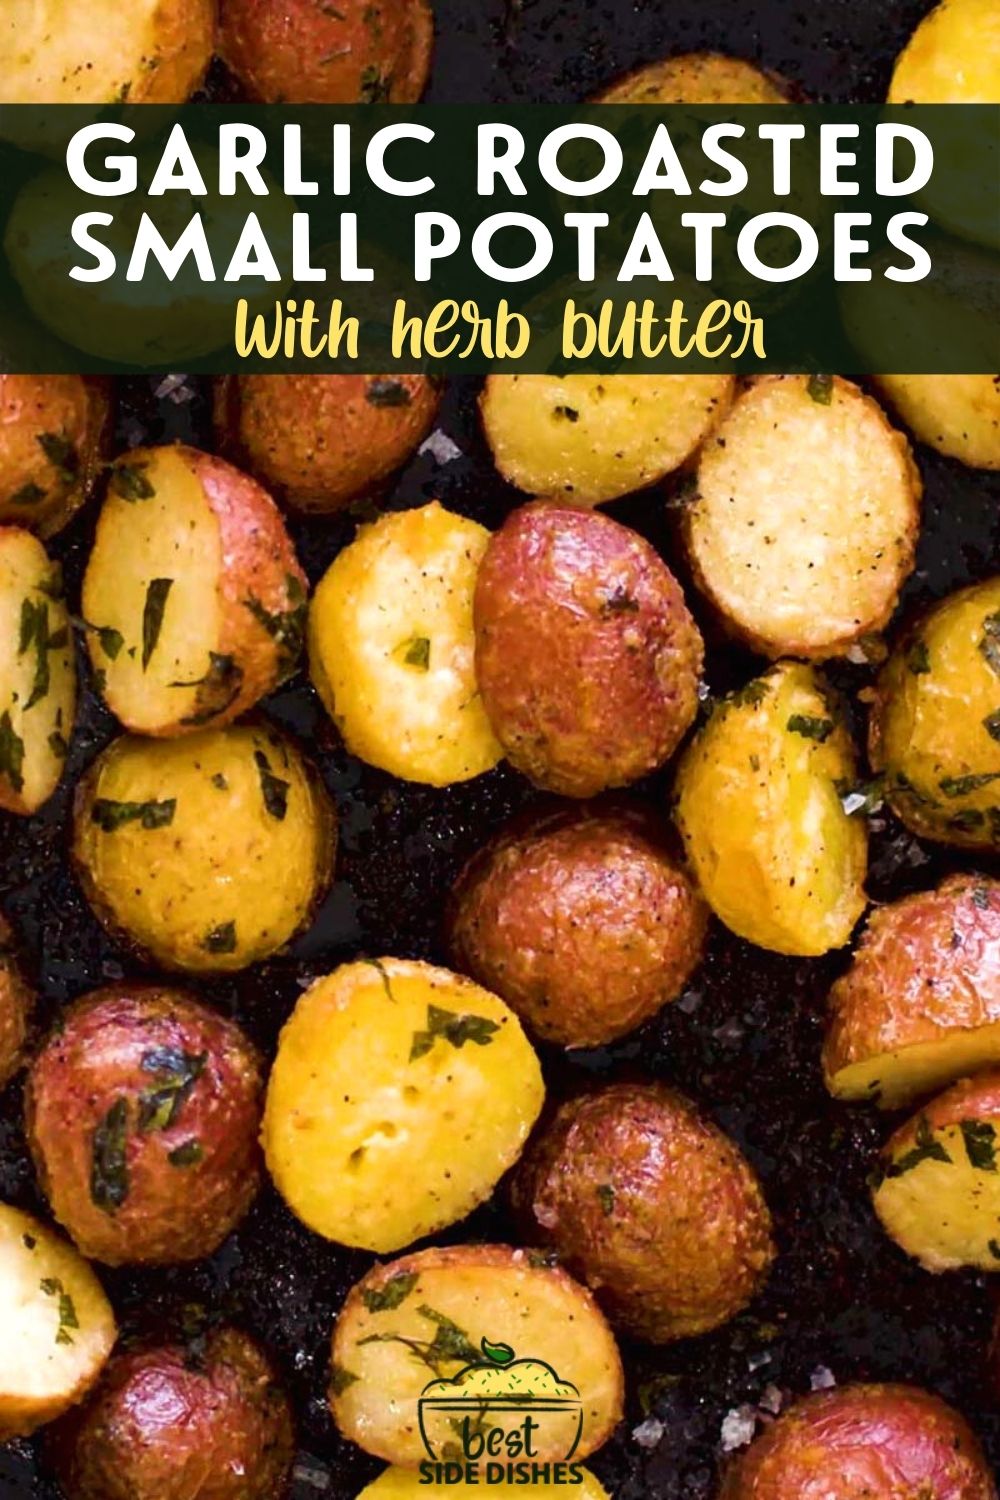 Oven Roasted Small Potatoes - Best Side Dishes